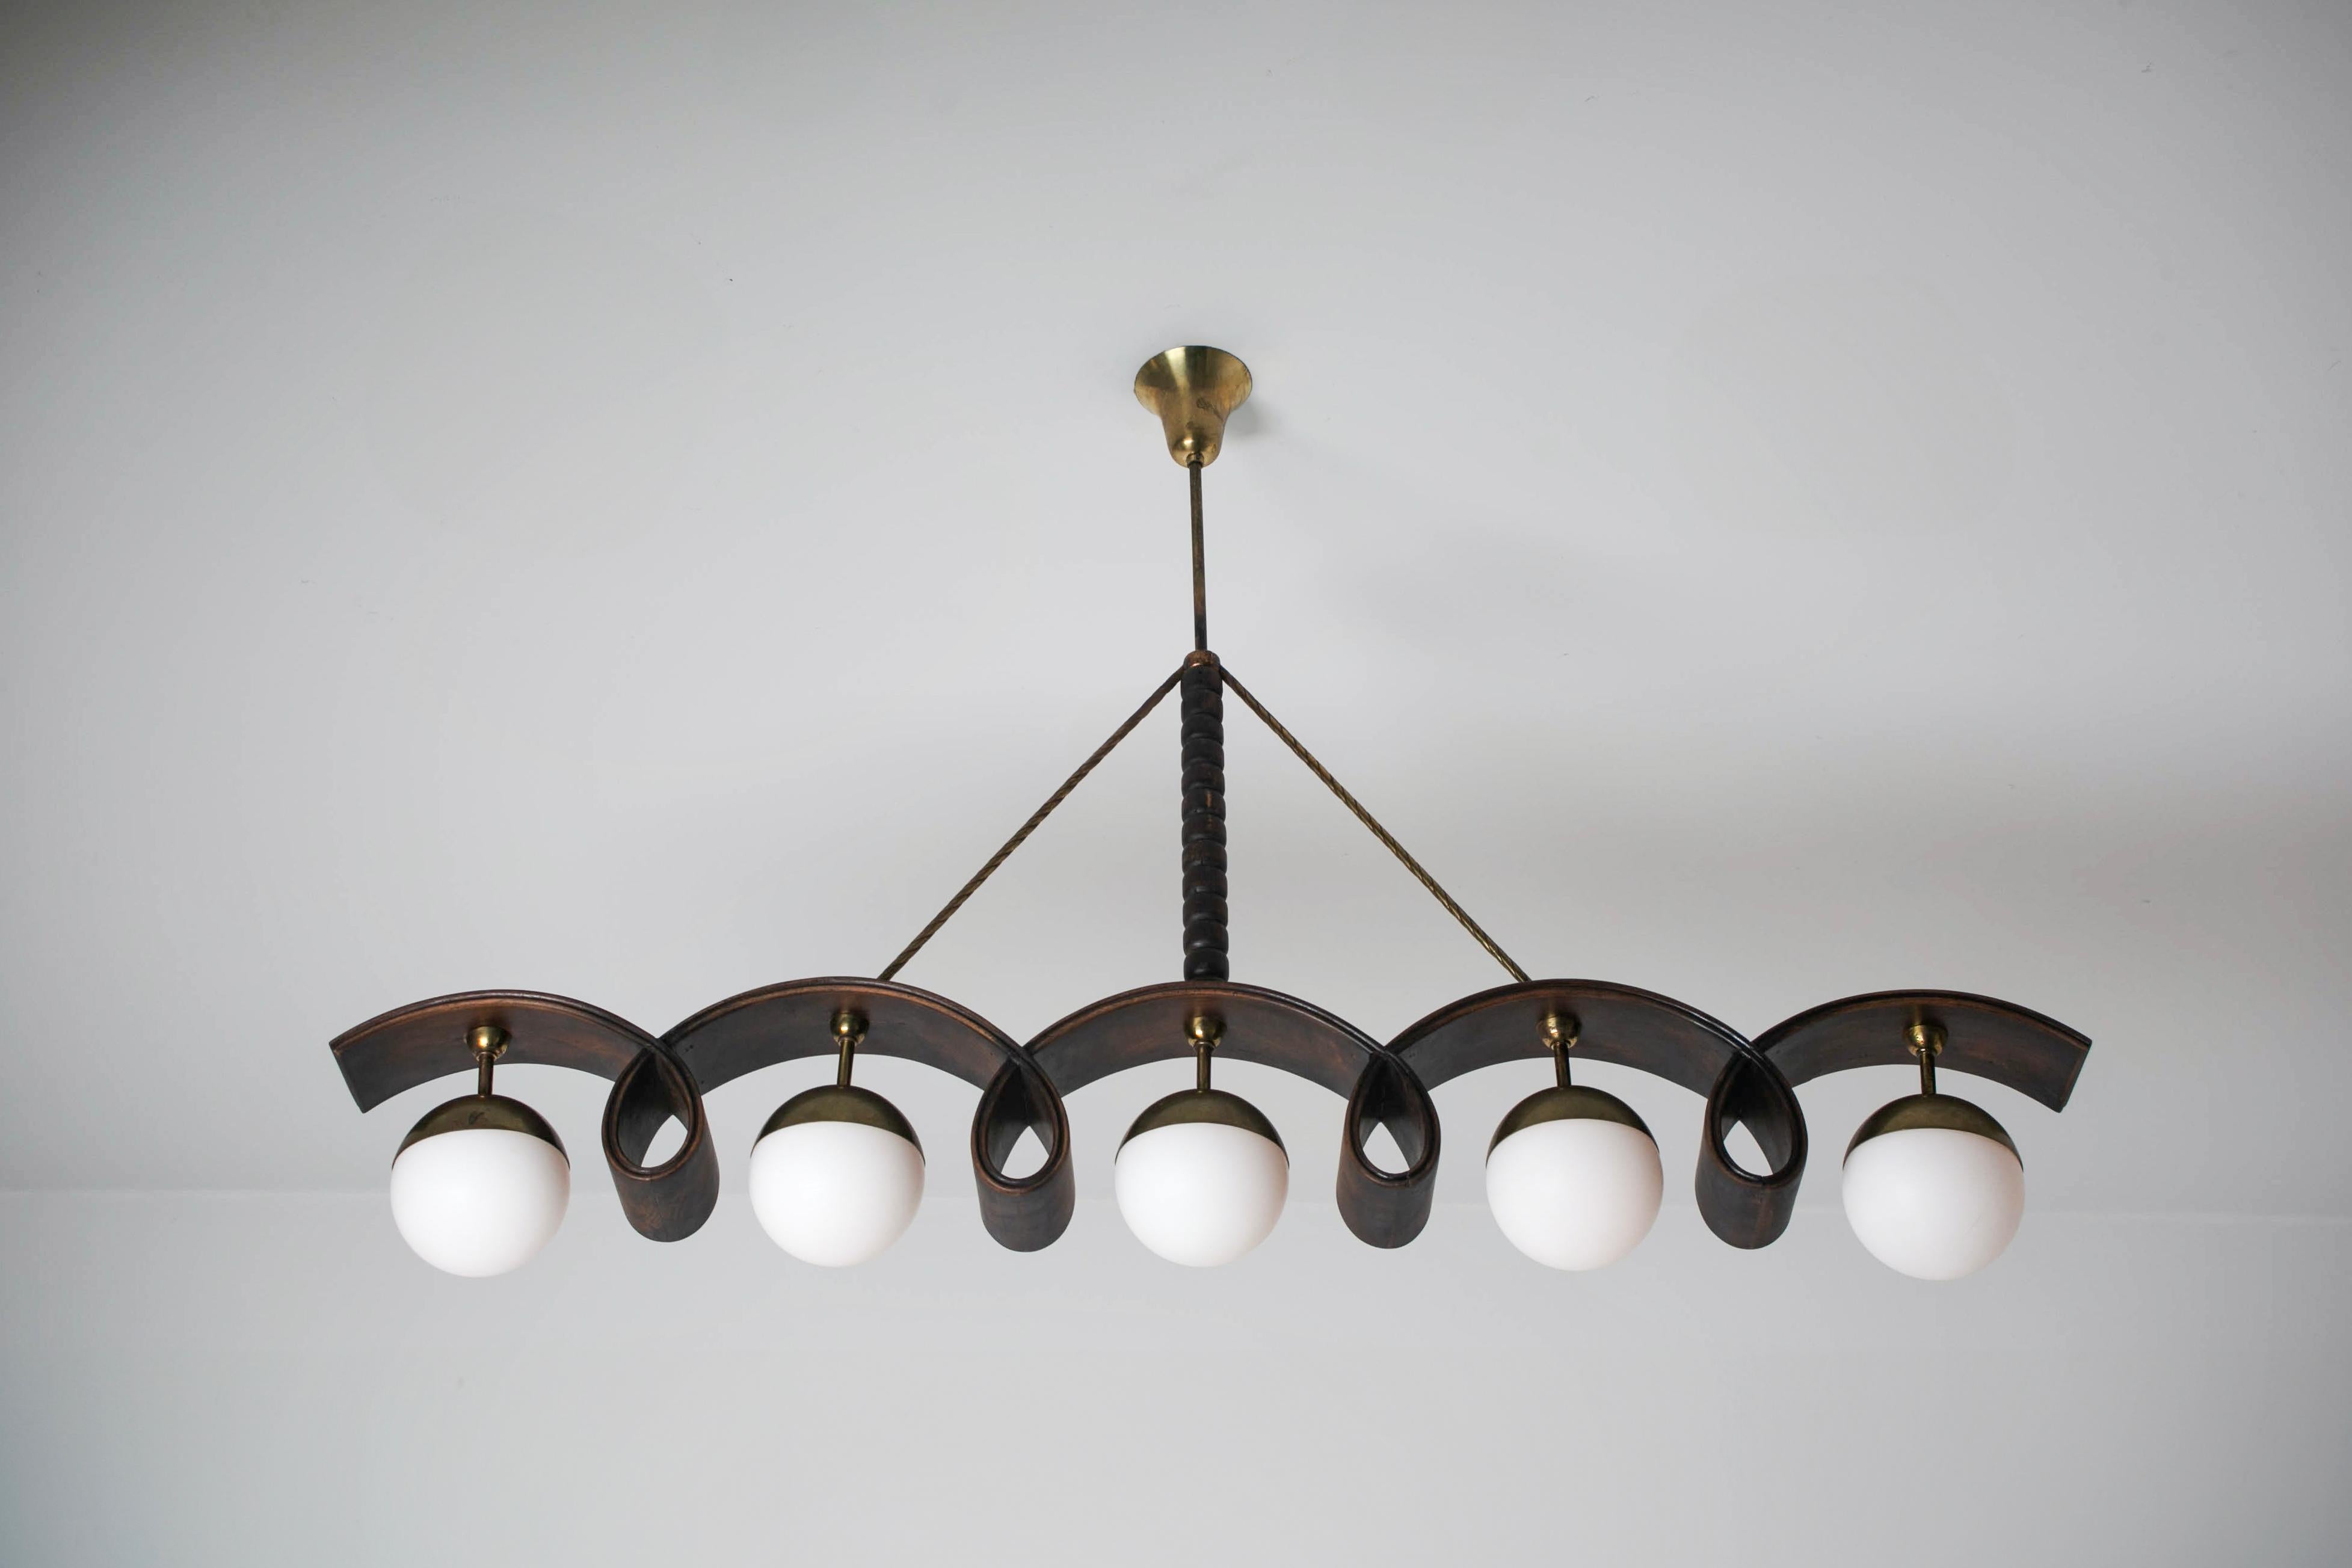 Chandelier by Osvaldo Borsani. Designed and manufactured in Italy, circa the 1940s. Beautiful linear bentwood chandelier consisting of a dark stained wood ribbon construction, paired with five opaline glass diffusers. A twisted brass stem finishes